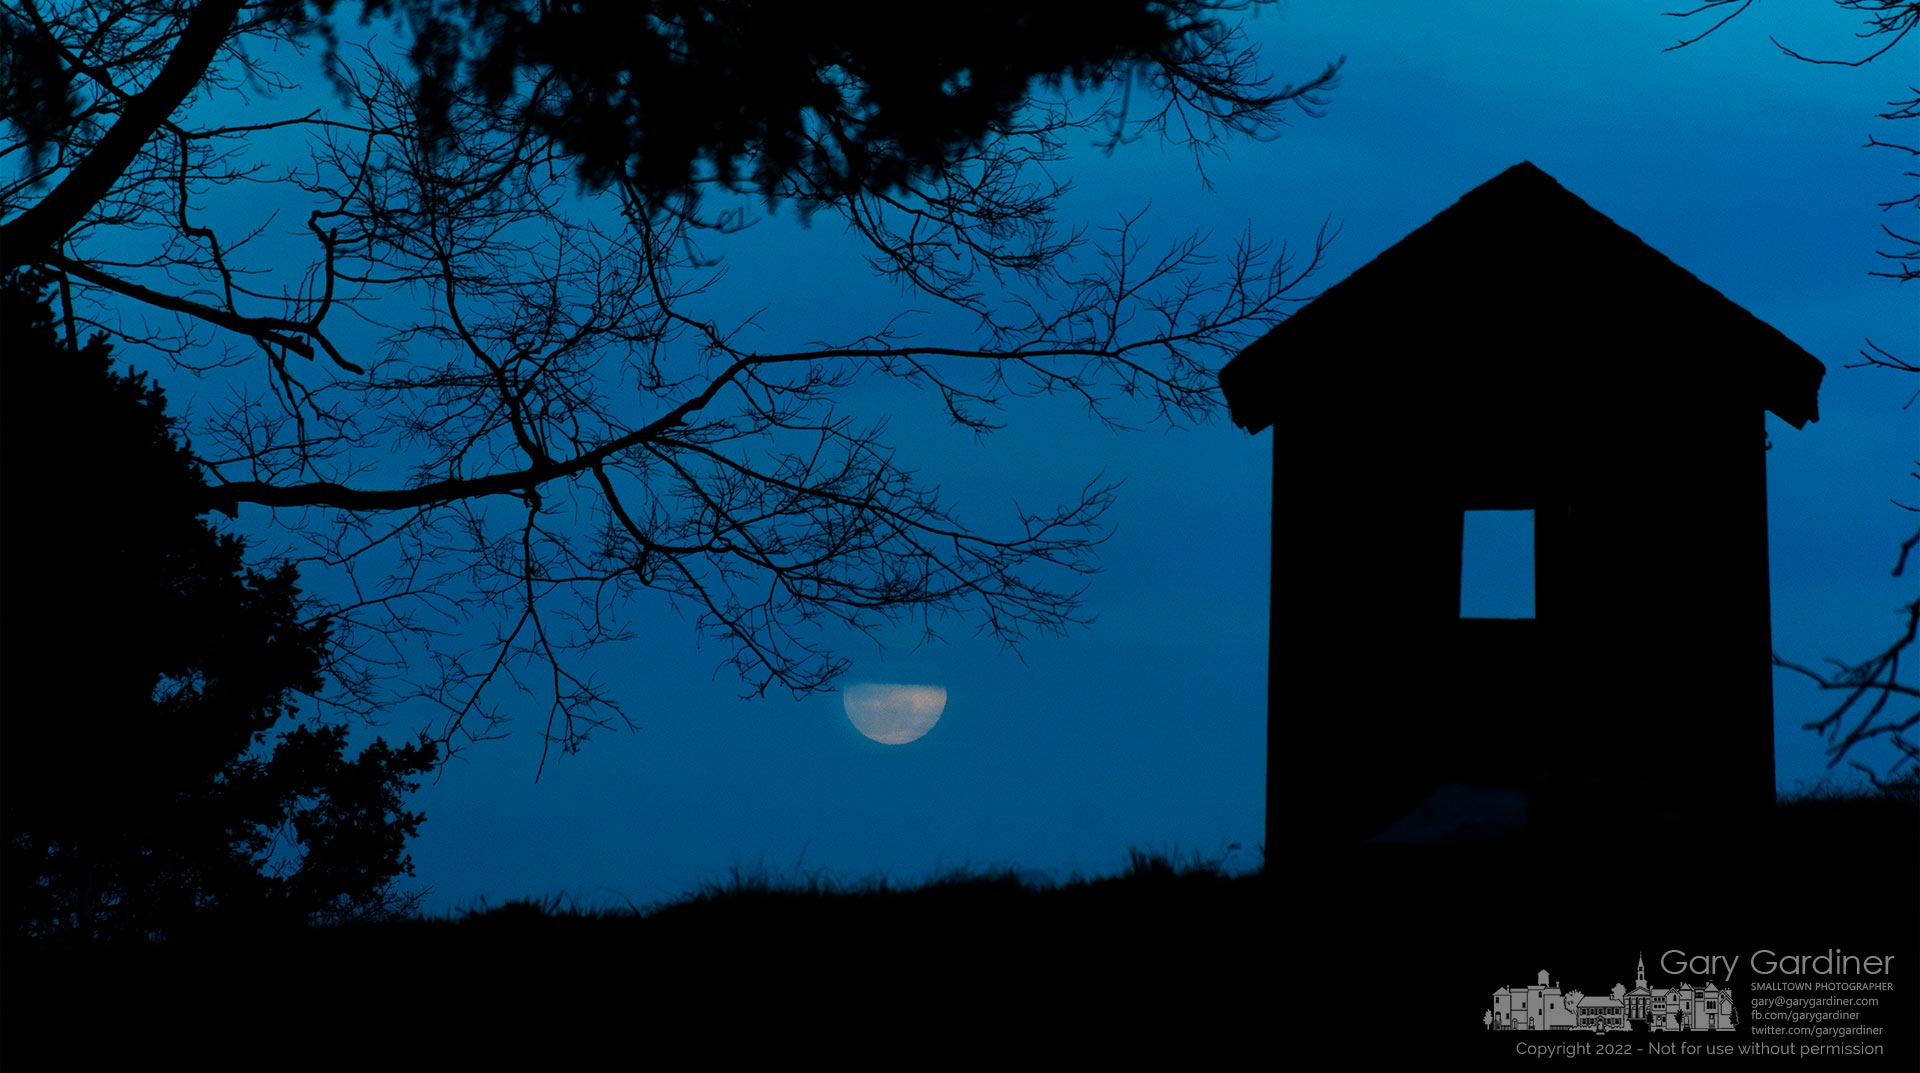 A full moon rises behind a layer of clouds laying over a Sharp Farm outbuilding on Africa Road. My Final Photo for March 17, 2022.